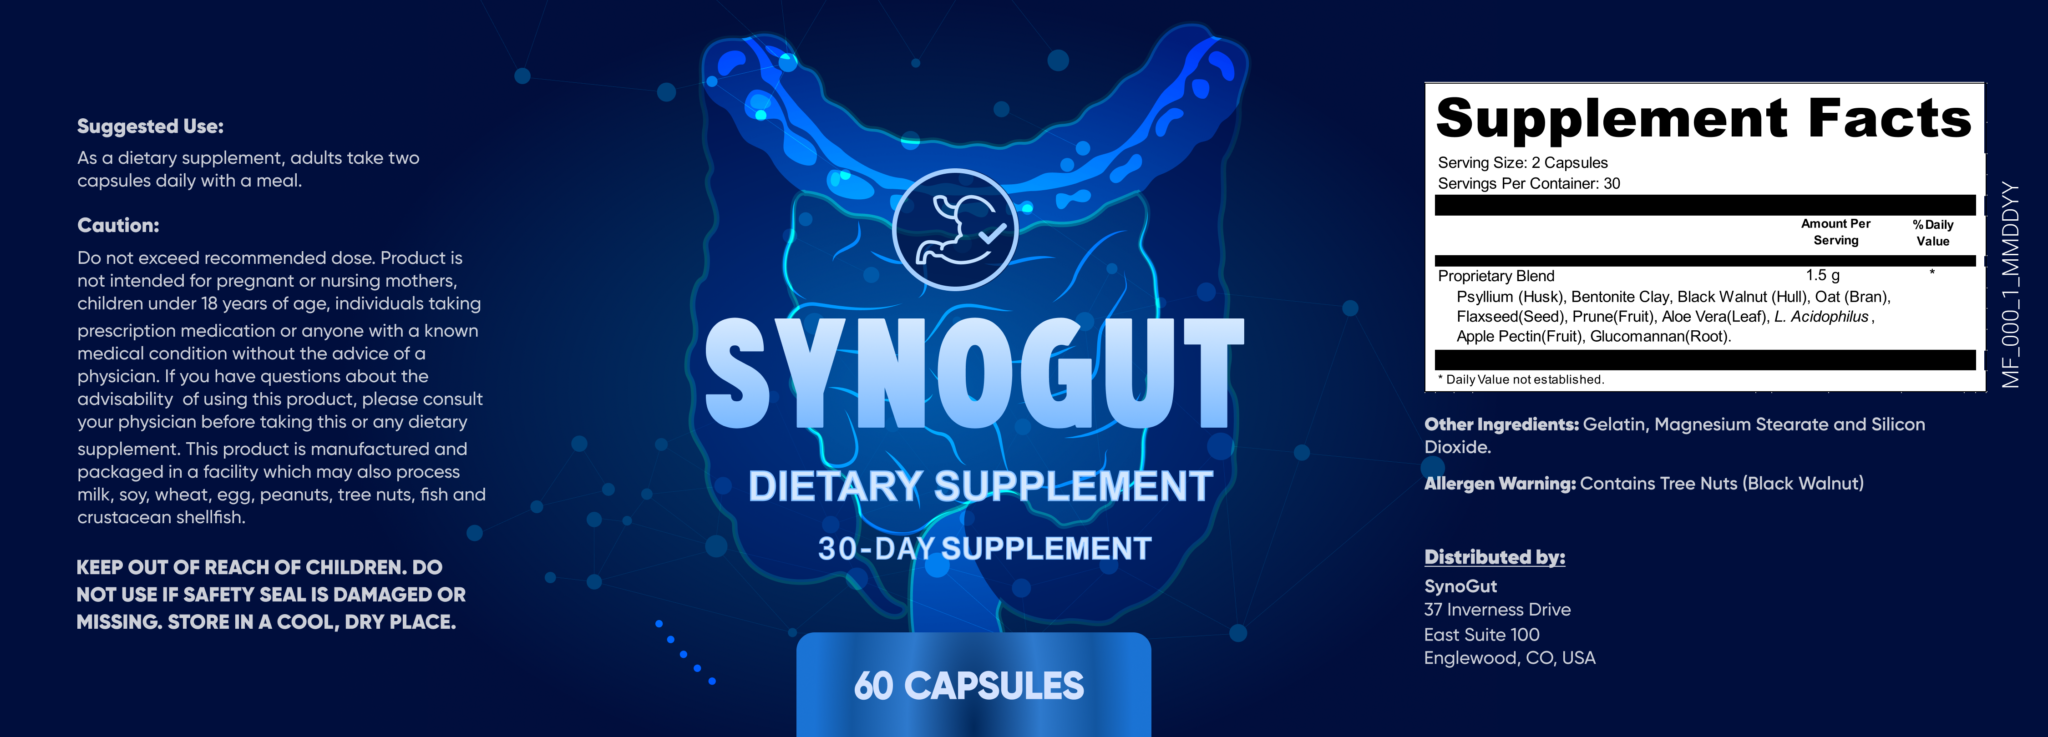 What Are The Ingredients Of SynoGut?